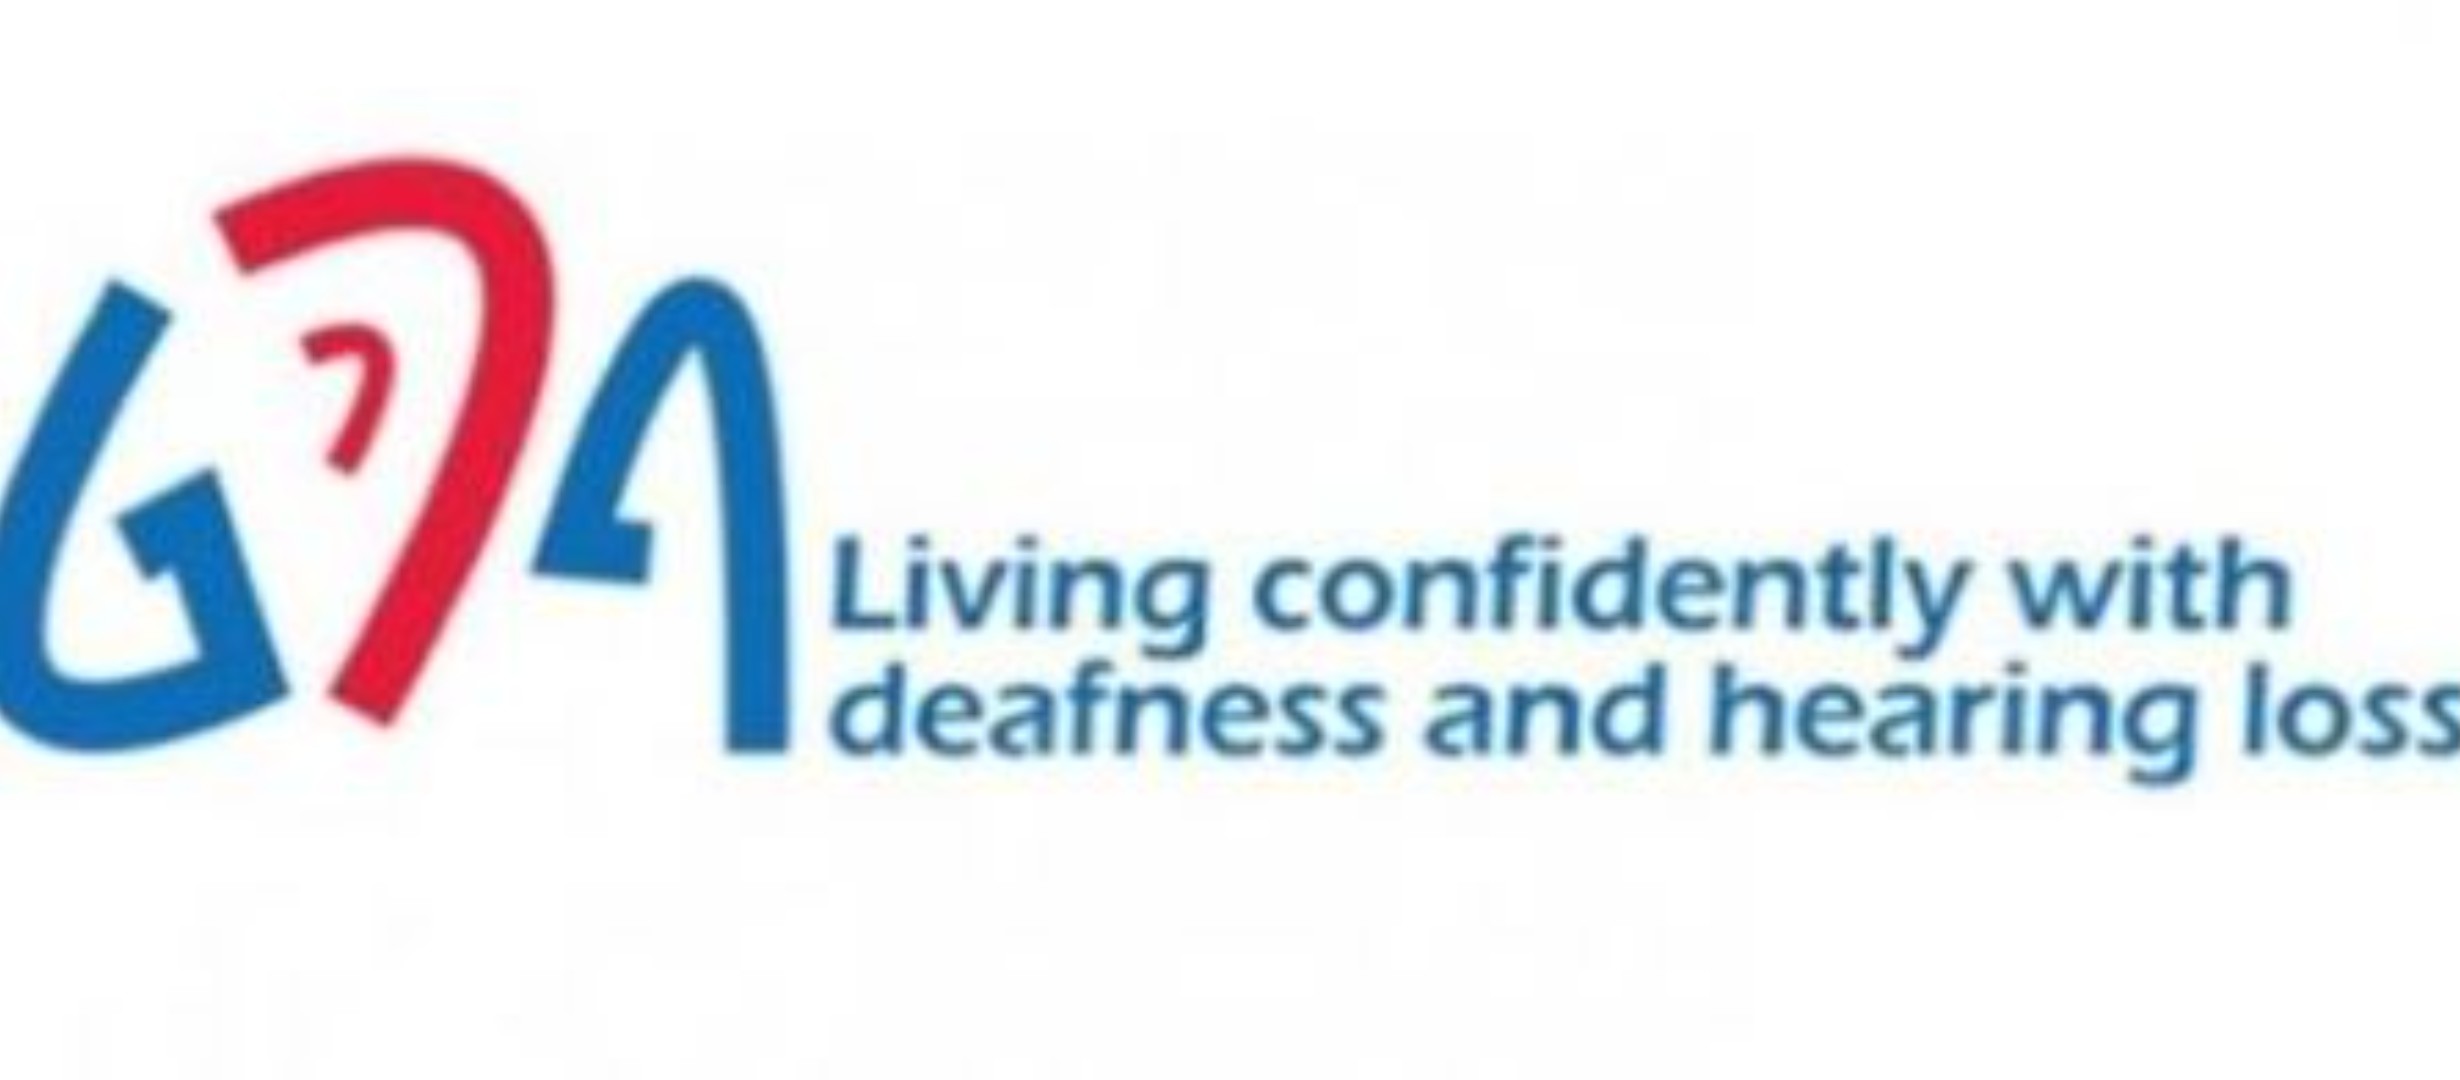 GDA - Living confidently with deafness and hearing loss